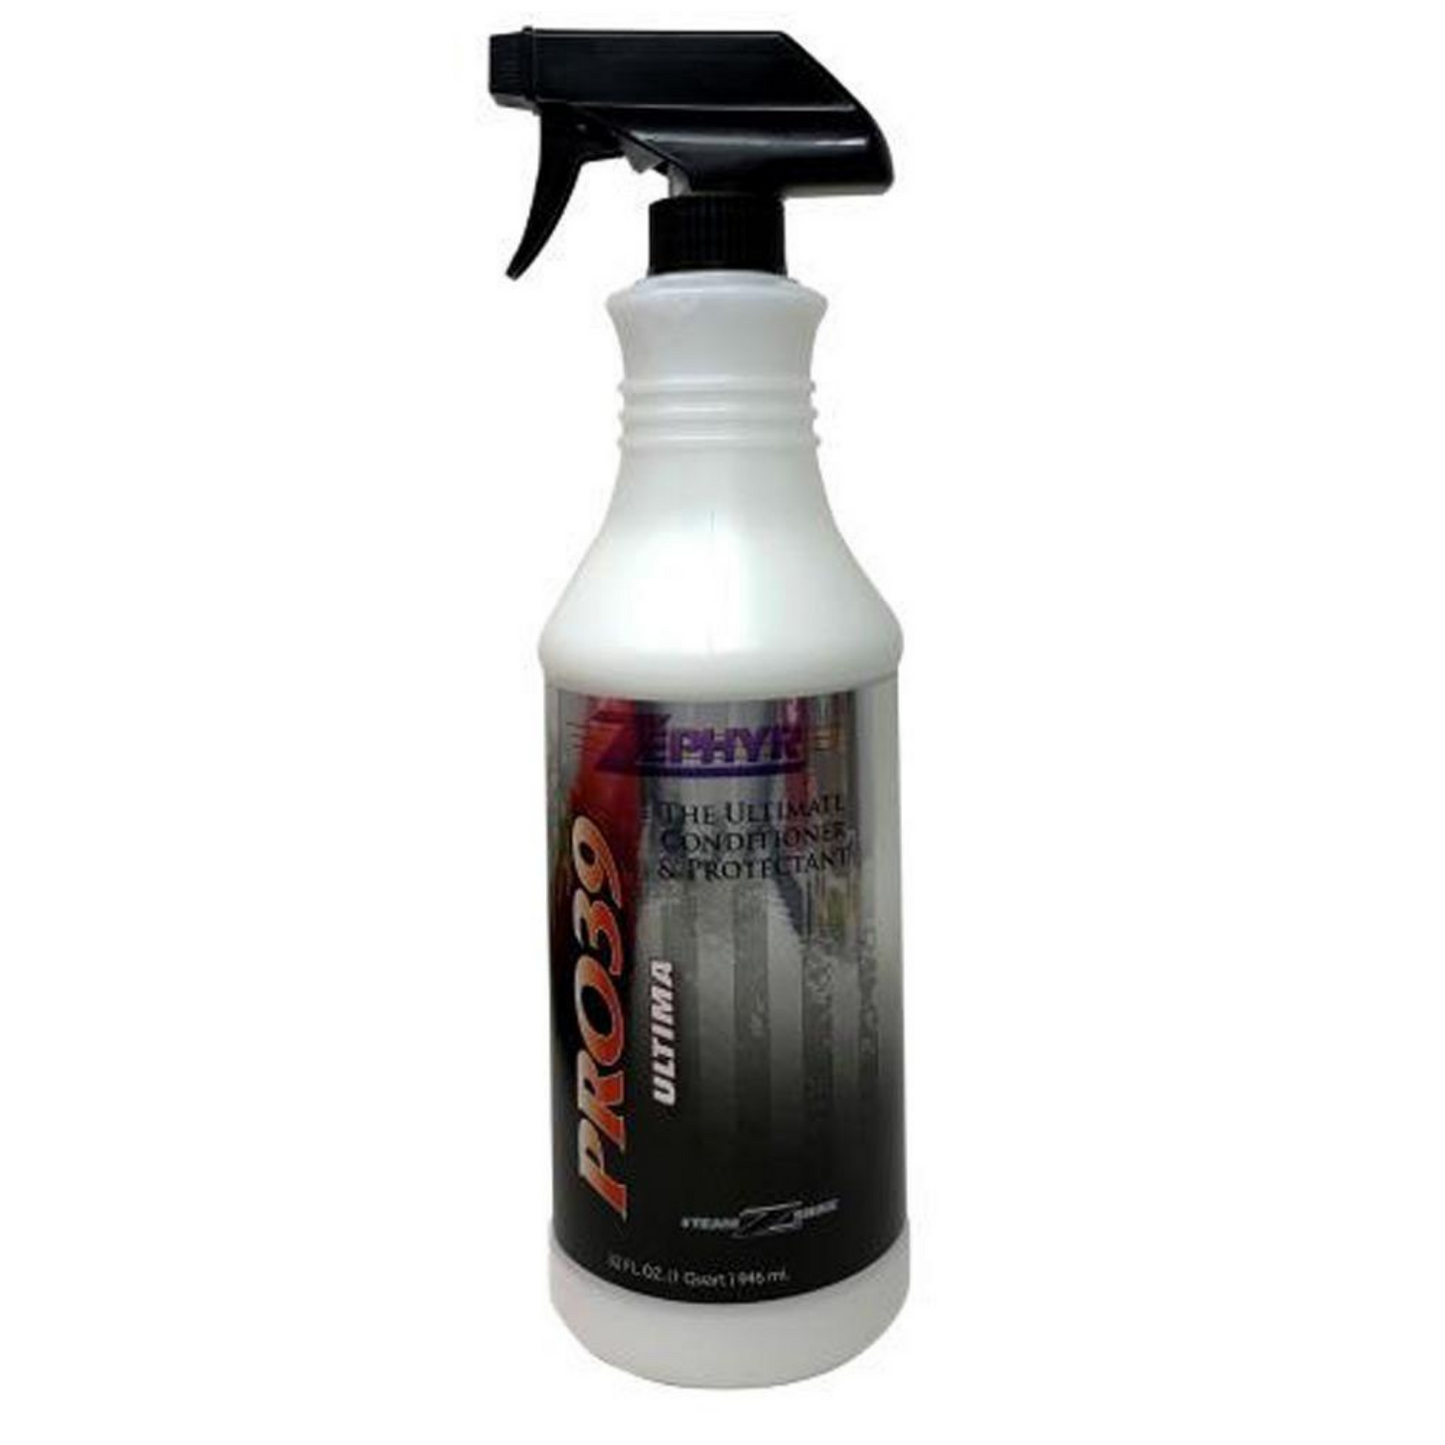 Pro39 Ultima Protectant